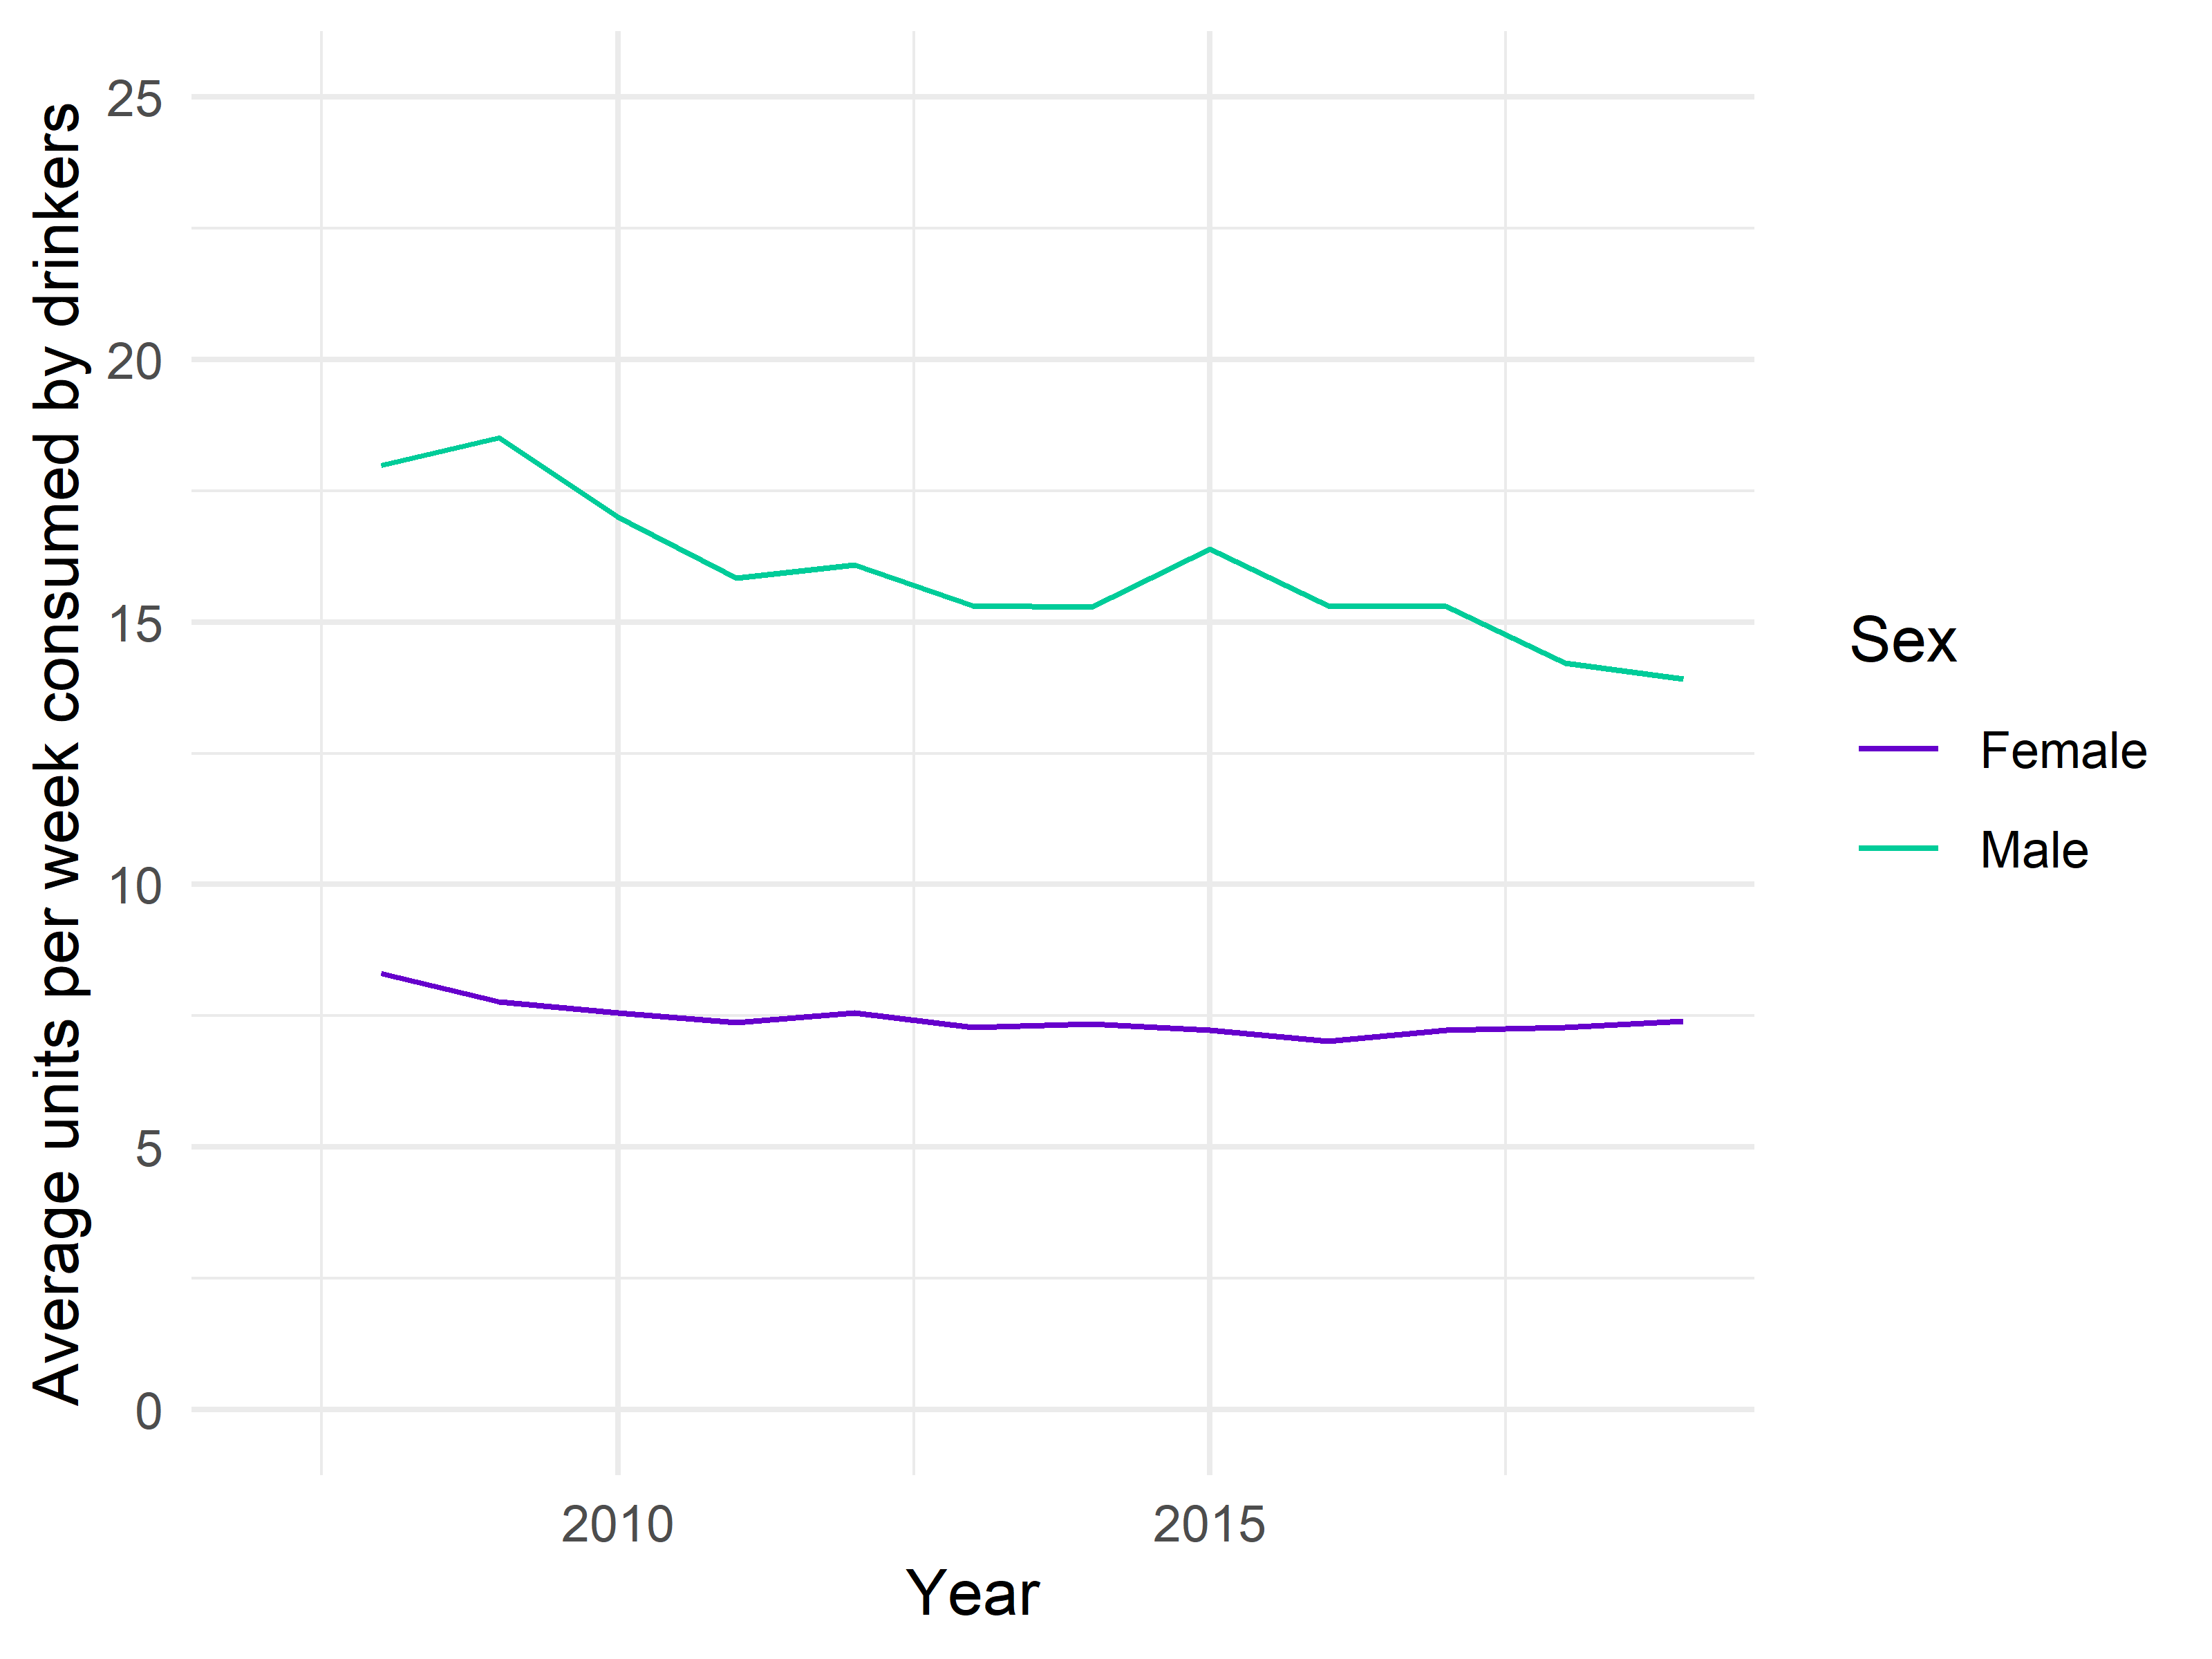 Figure 9. Sex specific average amount drunk per week by people who drink alcohol.